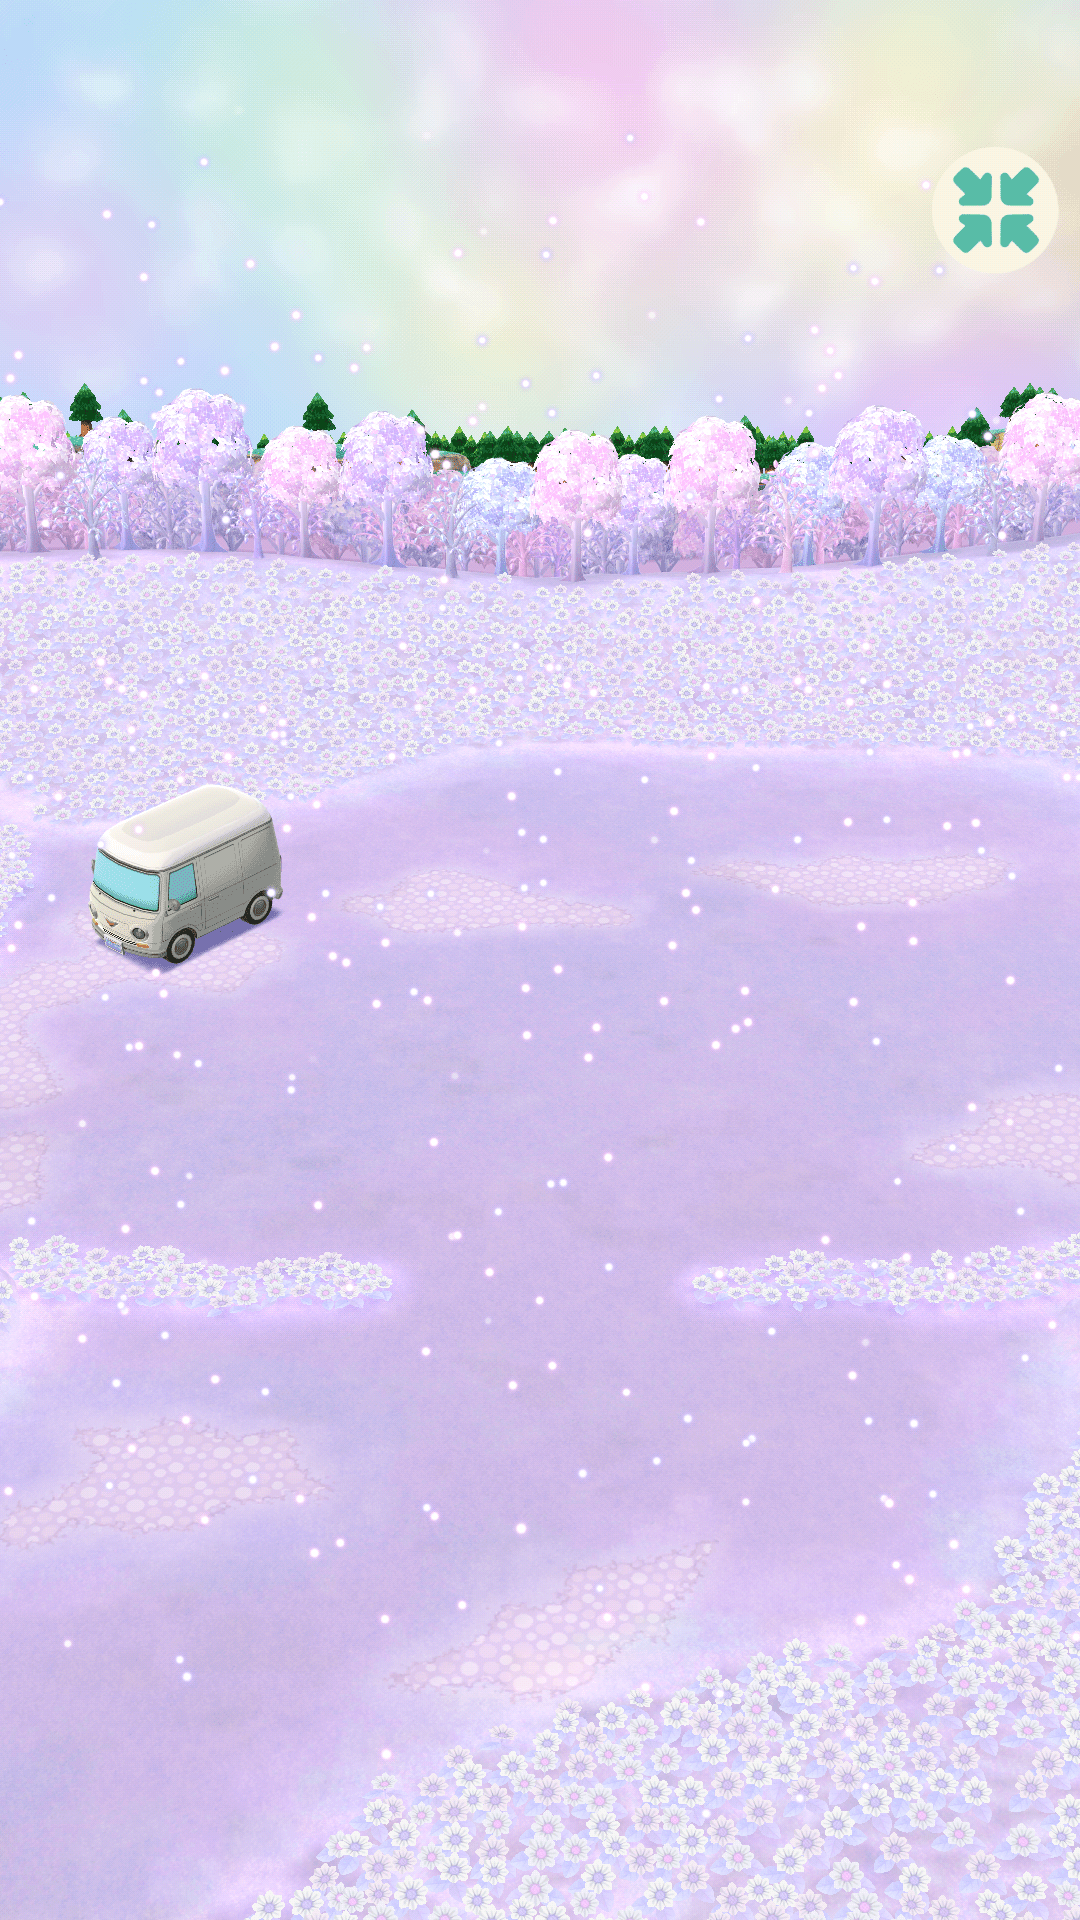 Fairy Tale Flowers (Camping Site Backdrop). Animal Crossing: Pocket Camp Info